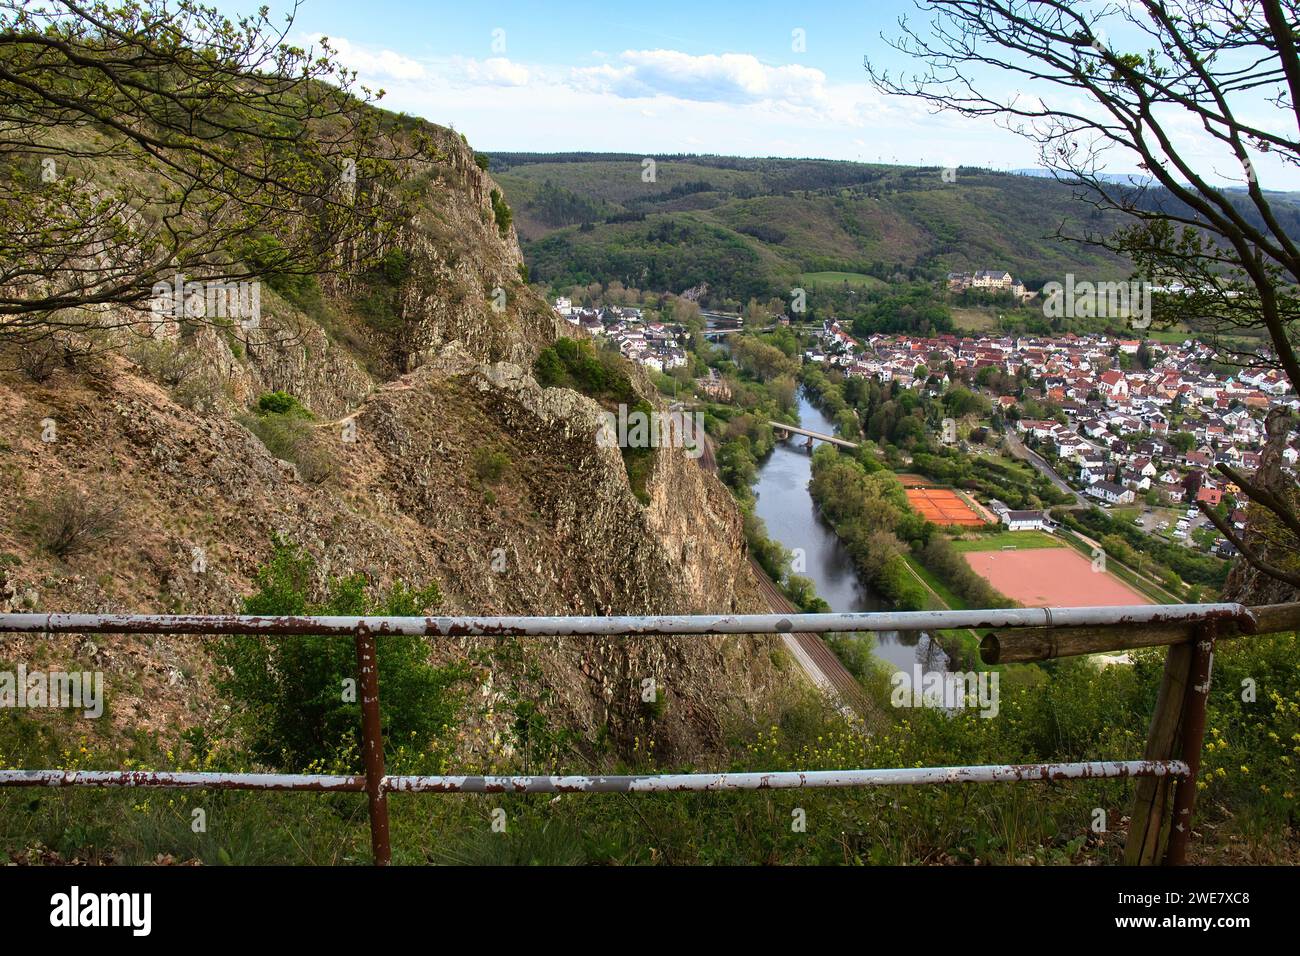 Bad Munster, Germany - May 9, 2021: Walking path with a rail at Rotenfels overlooking the town of Bad Munster and the Nahe River in Germany. Stock Photo